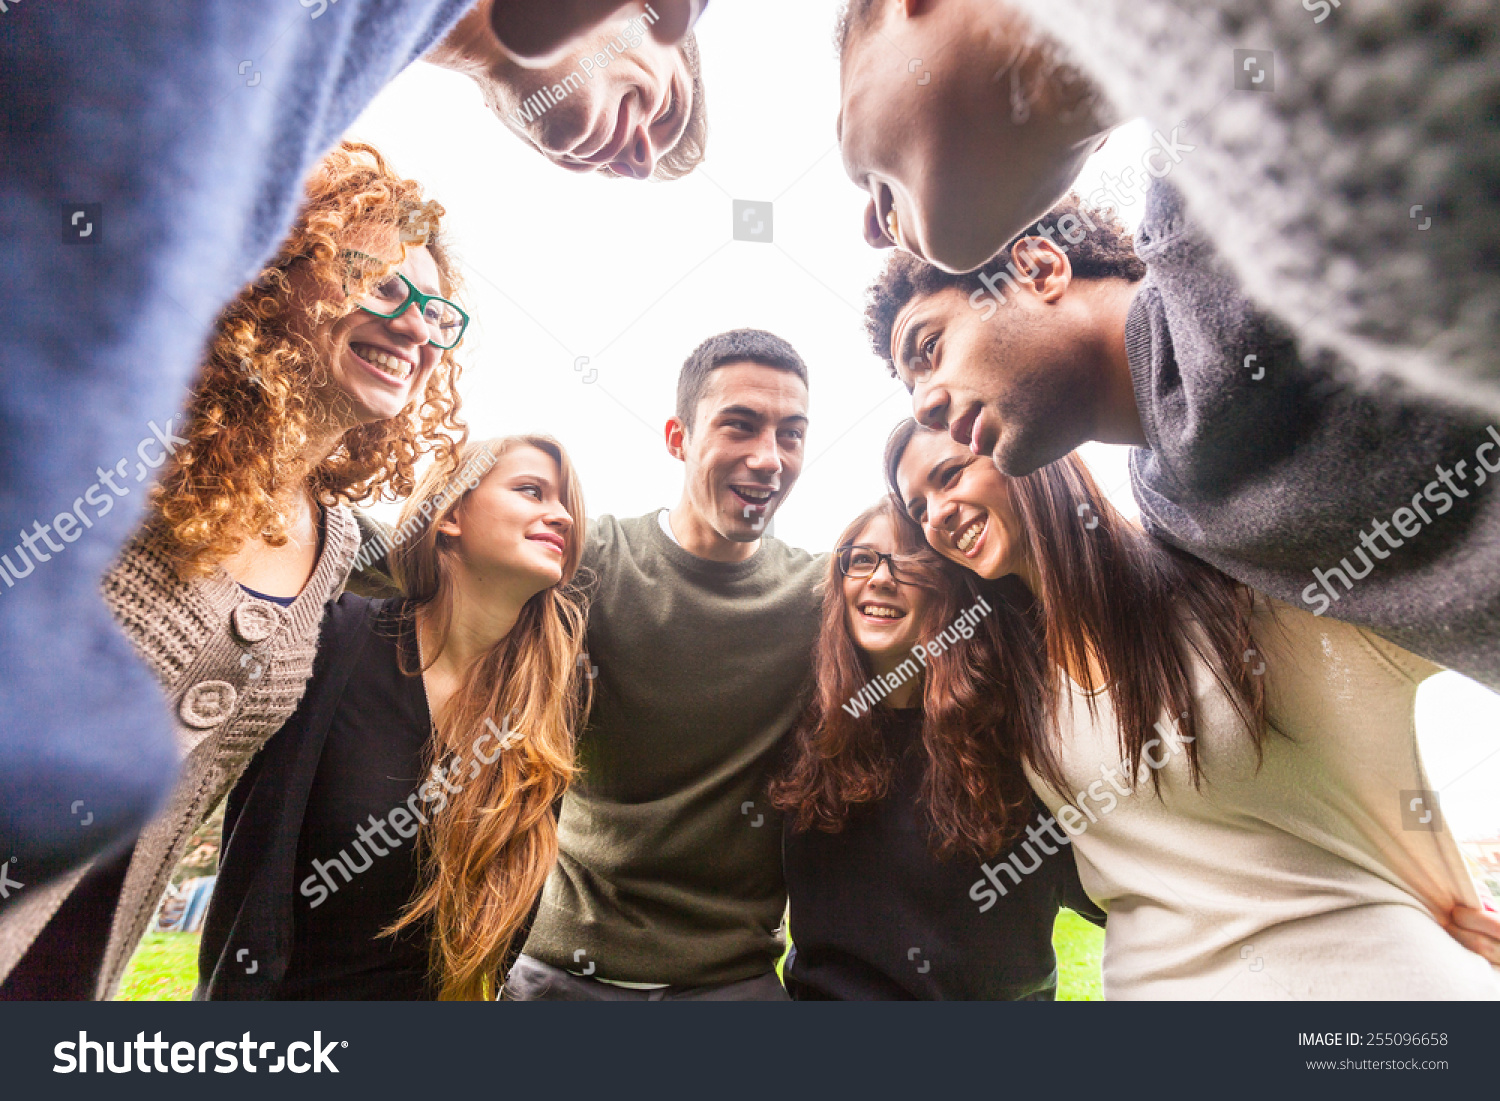 Multiracial group of friends embraced in a circle, strong concept about teamwork and cooperation, also refers to immigration and friendship. #255096658